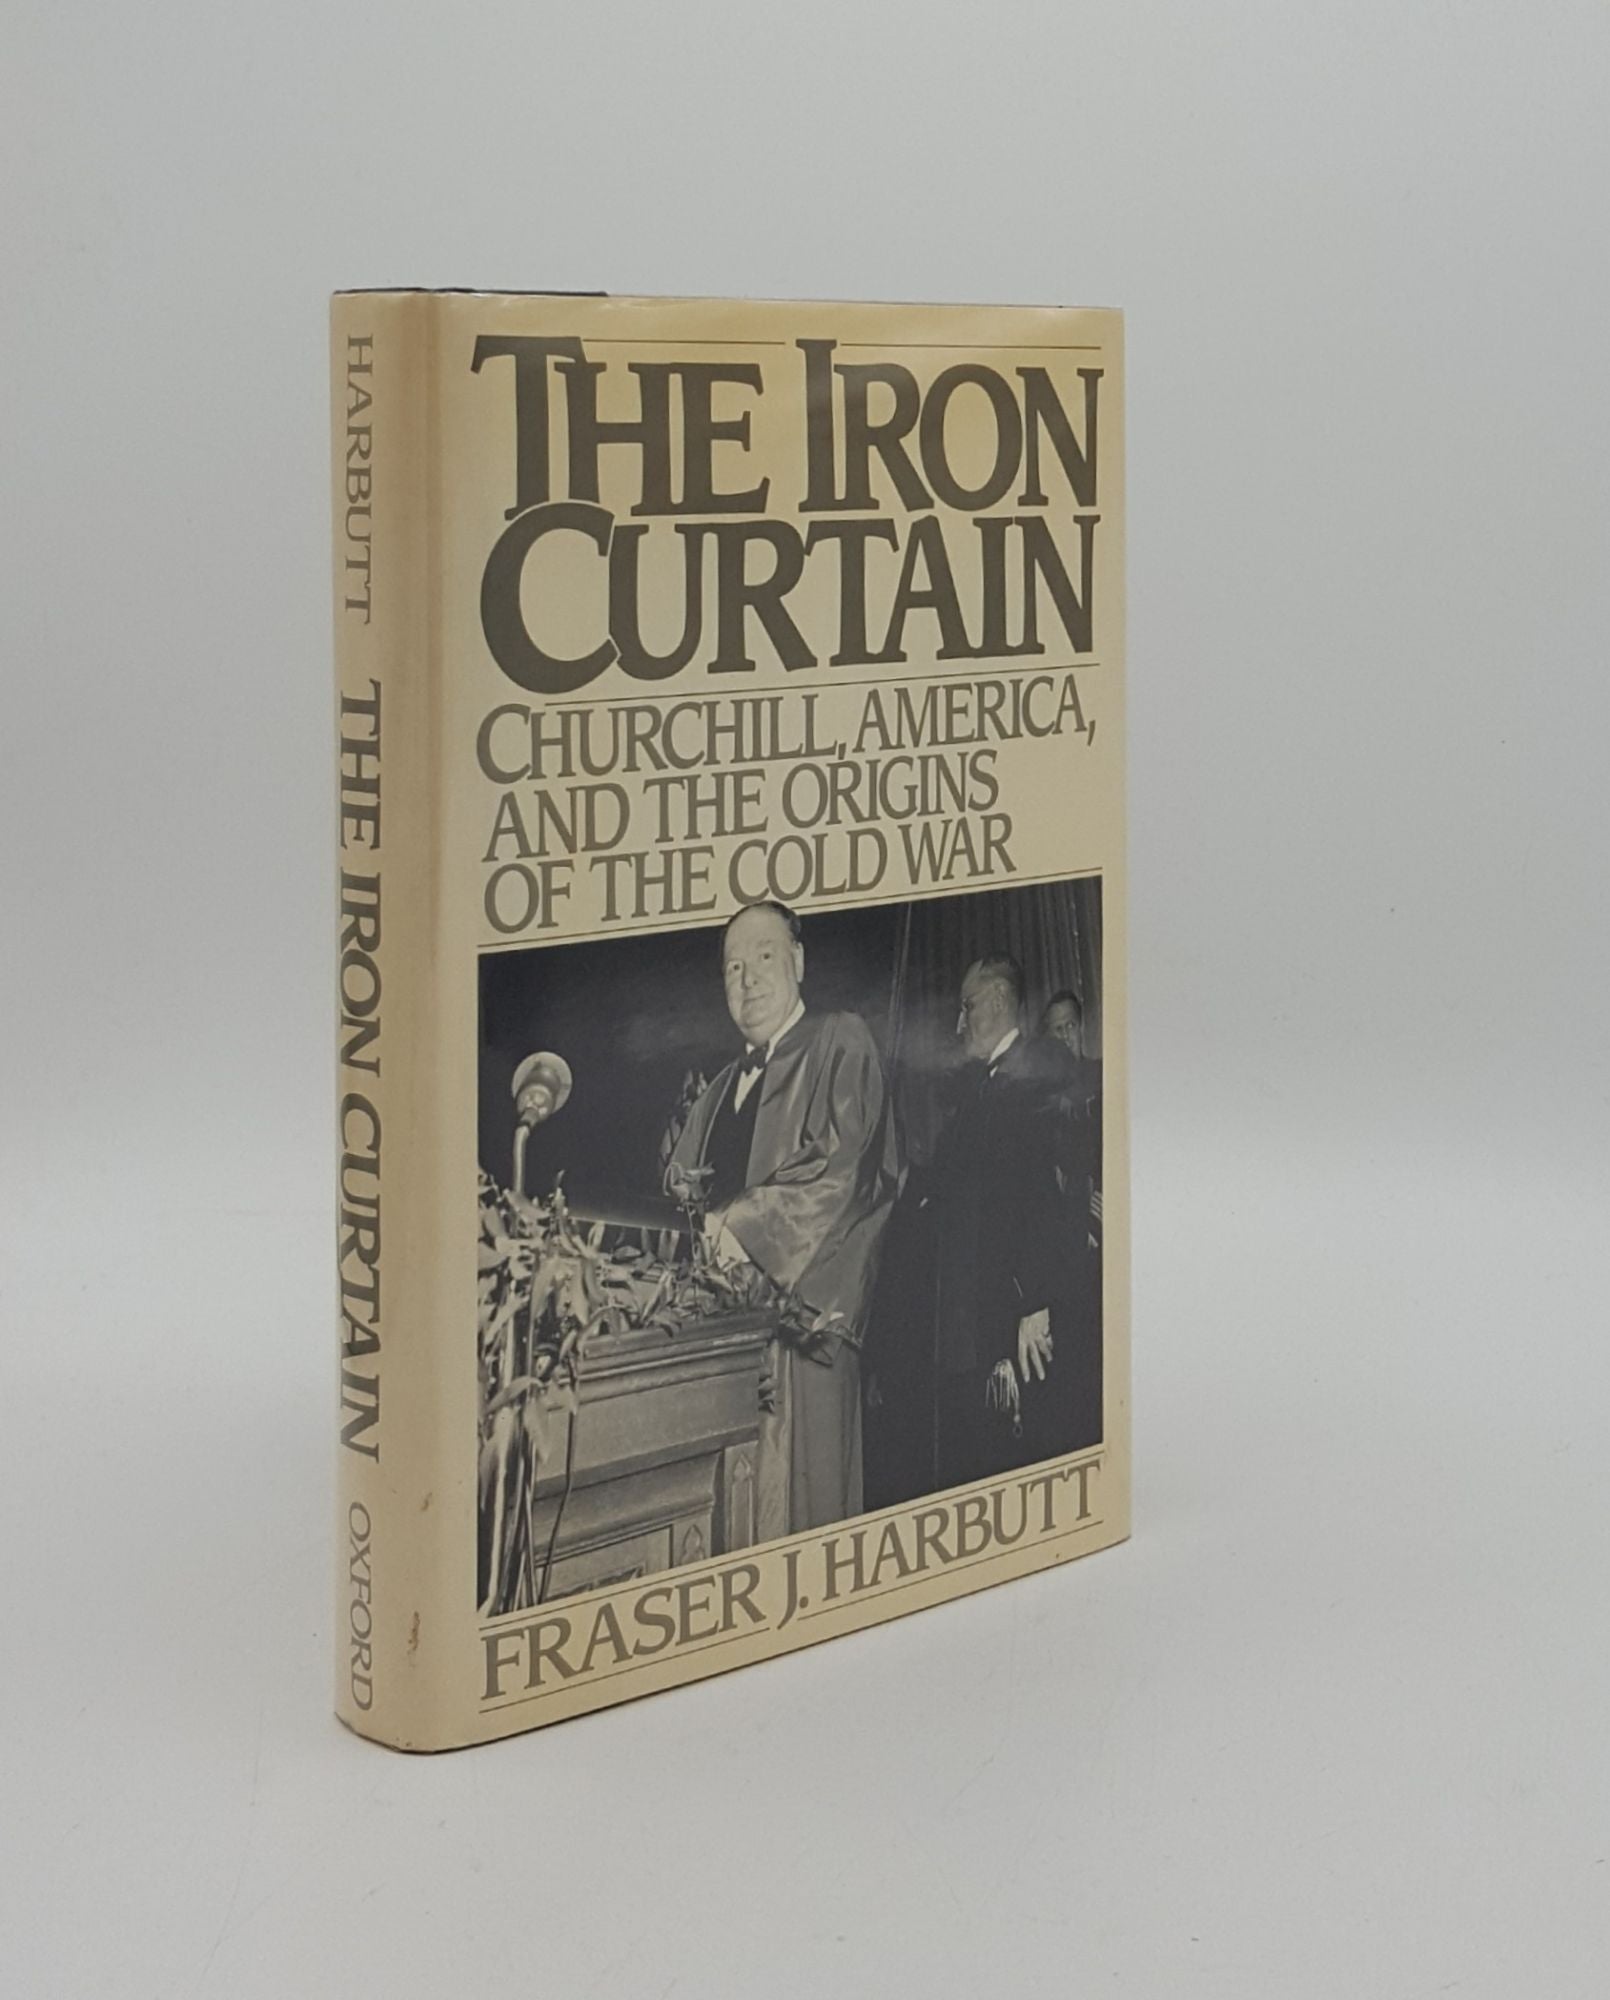 HARBUTT Fraser J. - The Iron Curtain Churchill America and the Origins of the Cold War